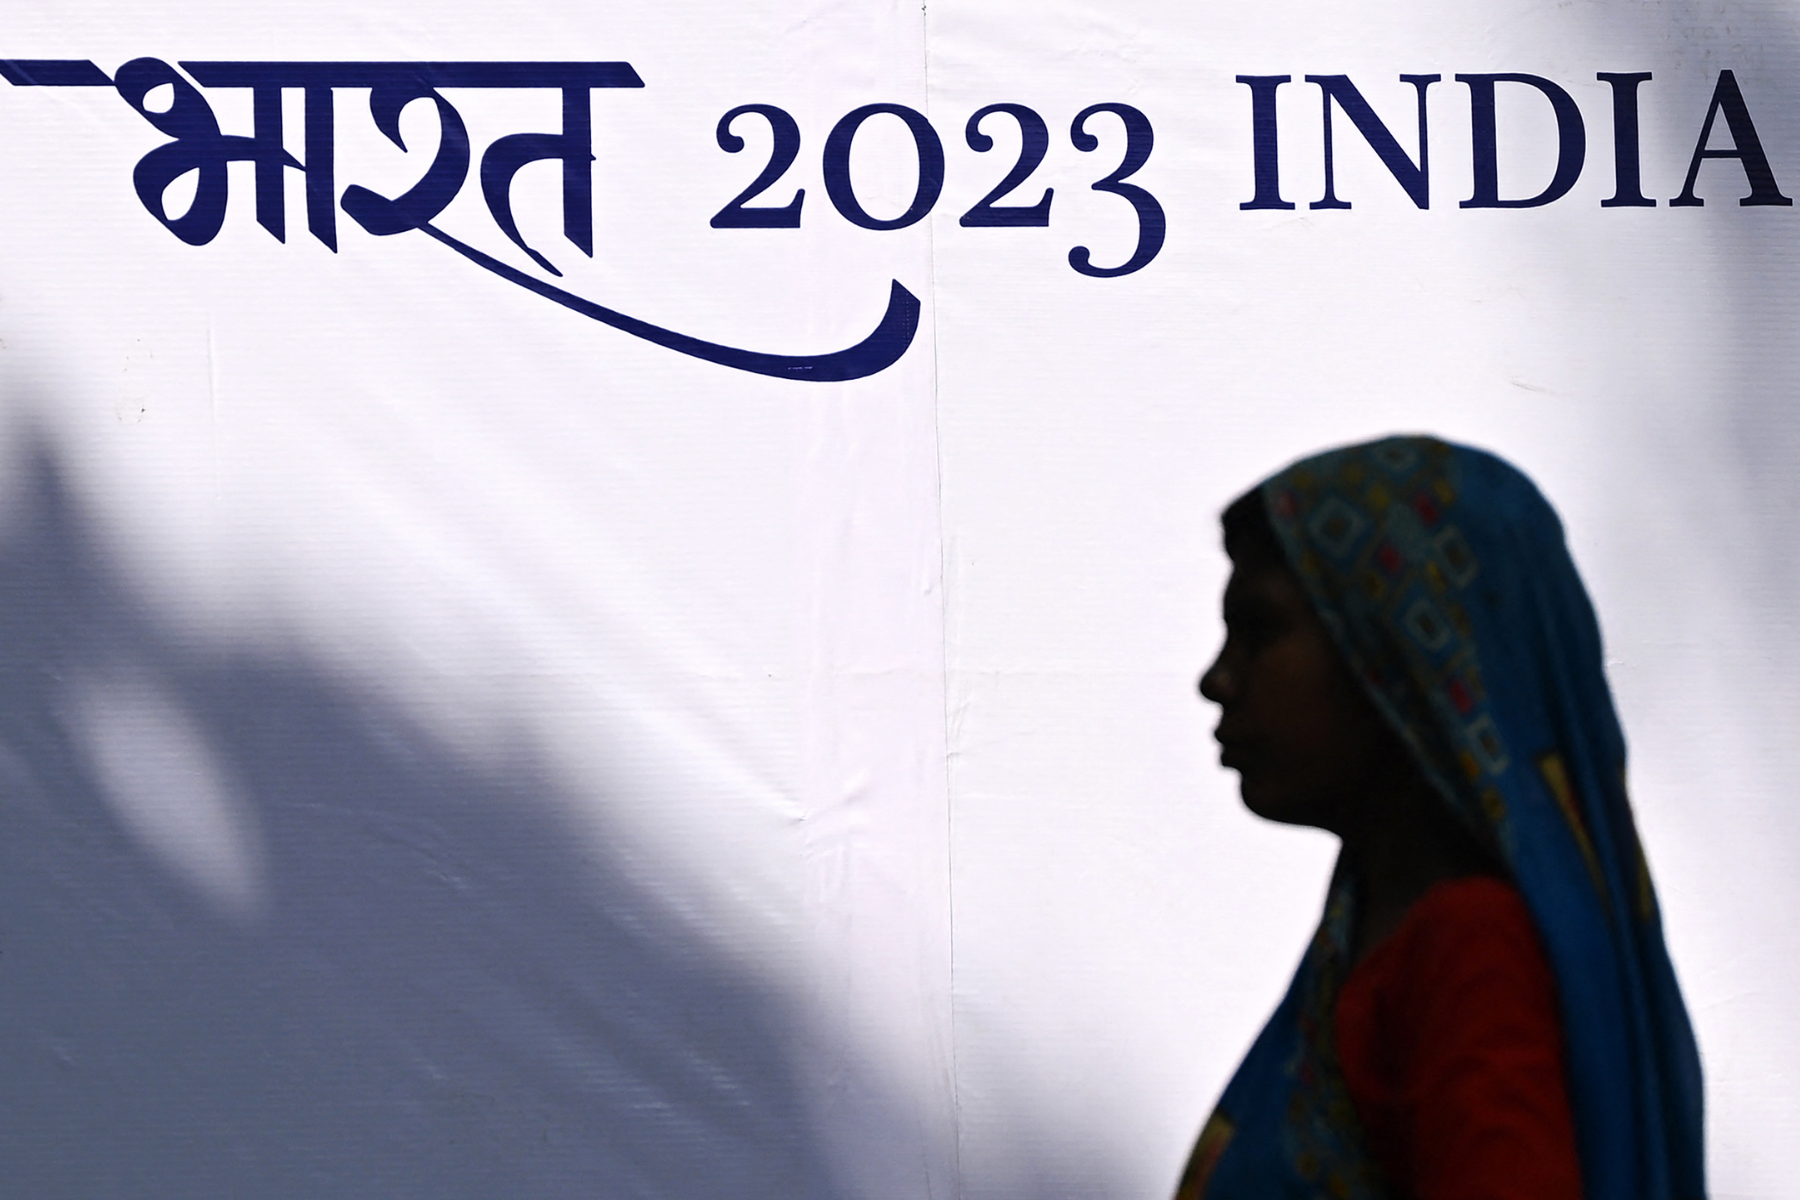 A woman stands in front of a G20 summit in New Delhi poster